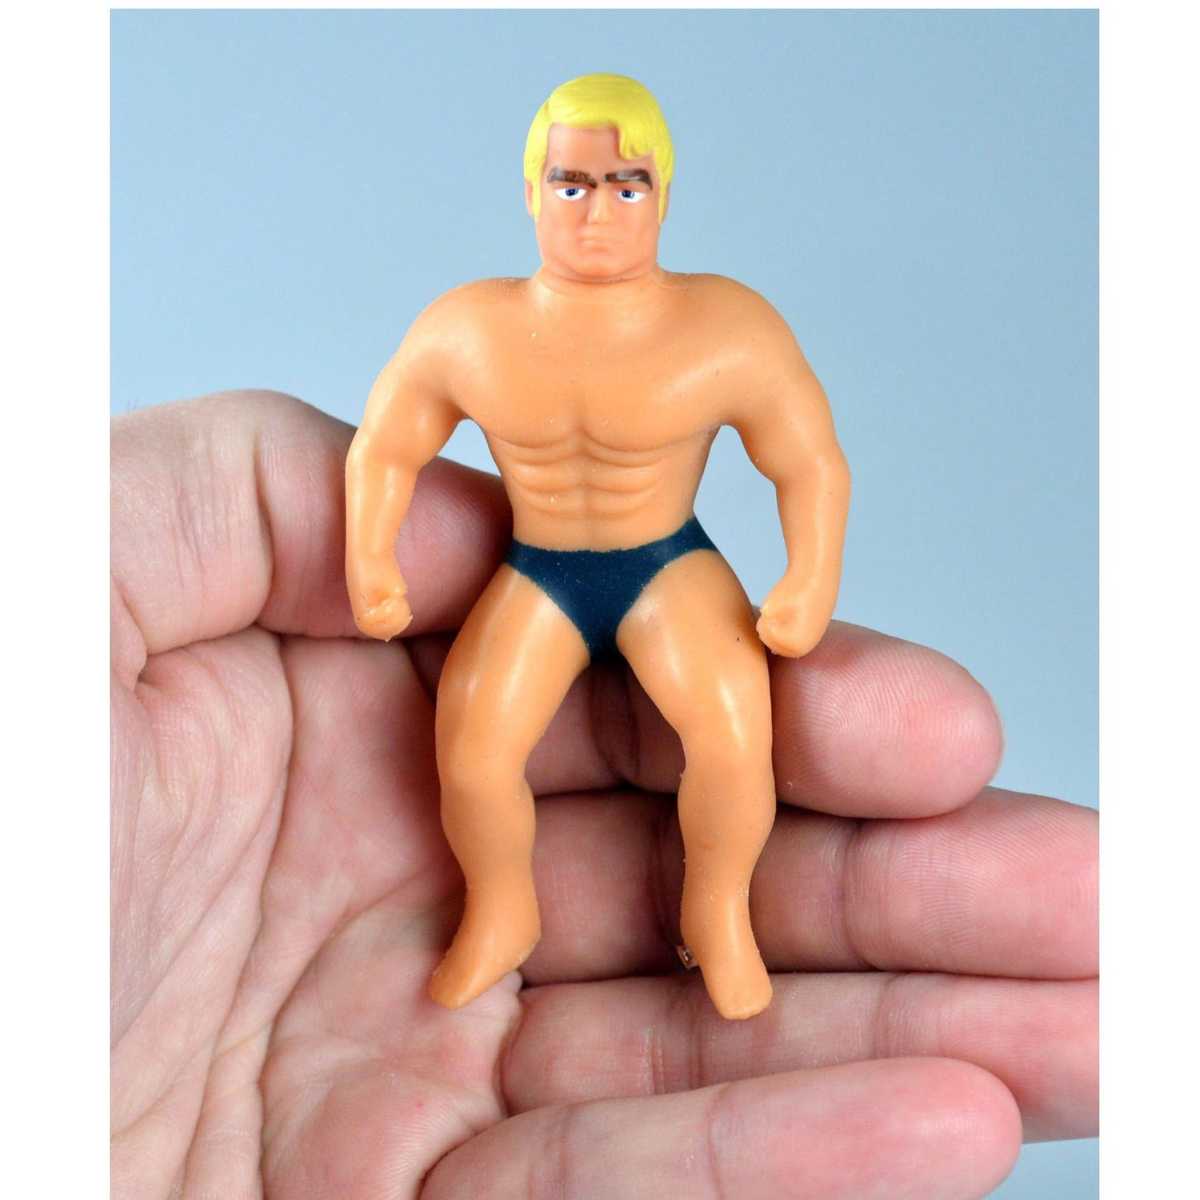 World's Smallest Stretch Armstrong Toy - Retro Collectible - Simon's Collectibles